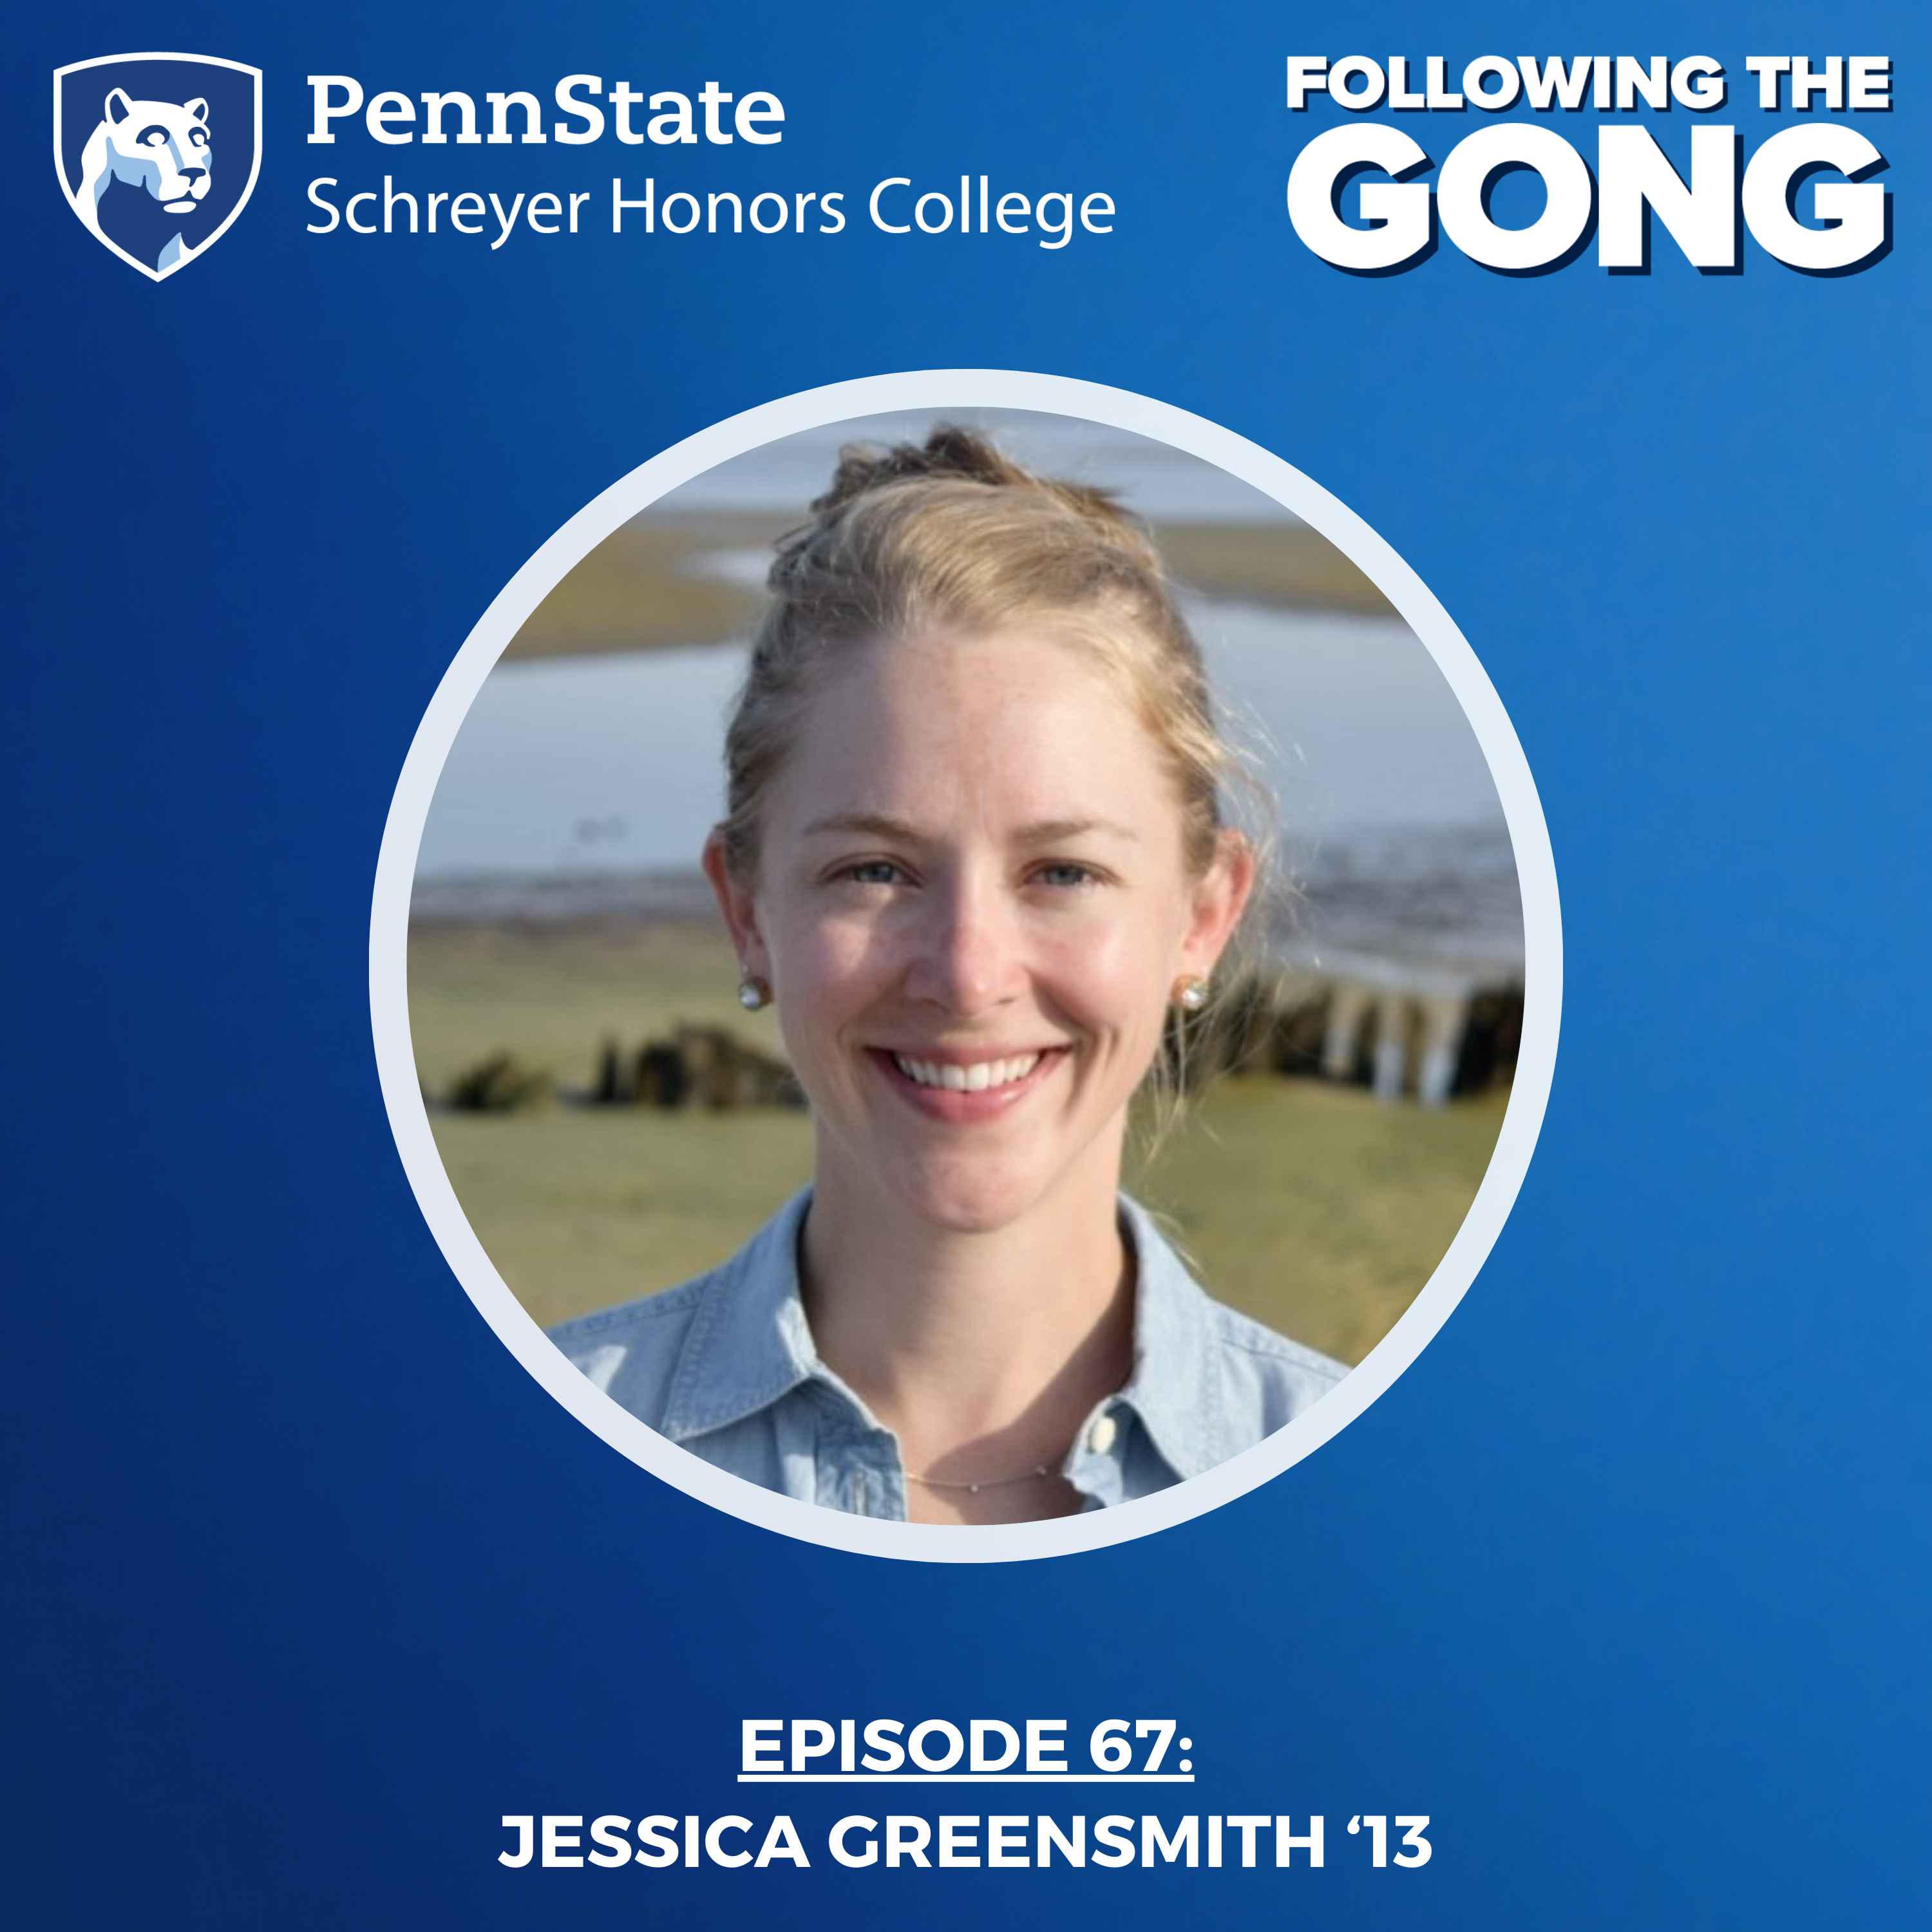 FTG 0067 – A (Nittany) Lion Running the Zoo with Wildlife Educator Jessica Greensmith ’13